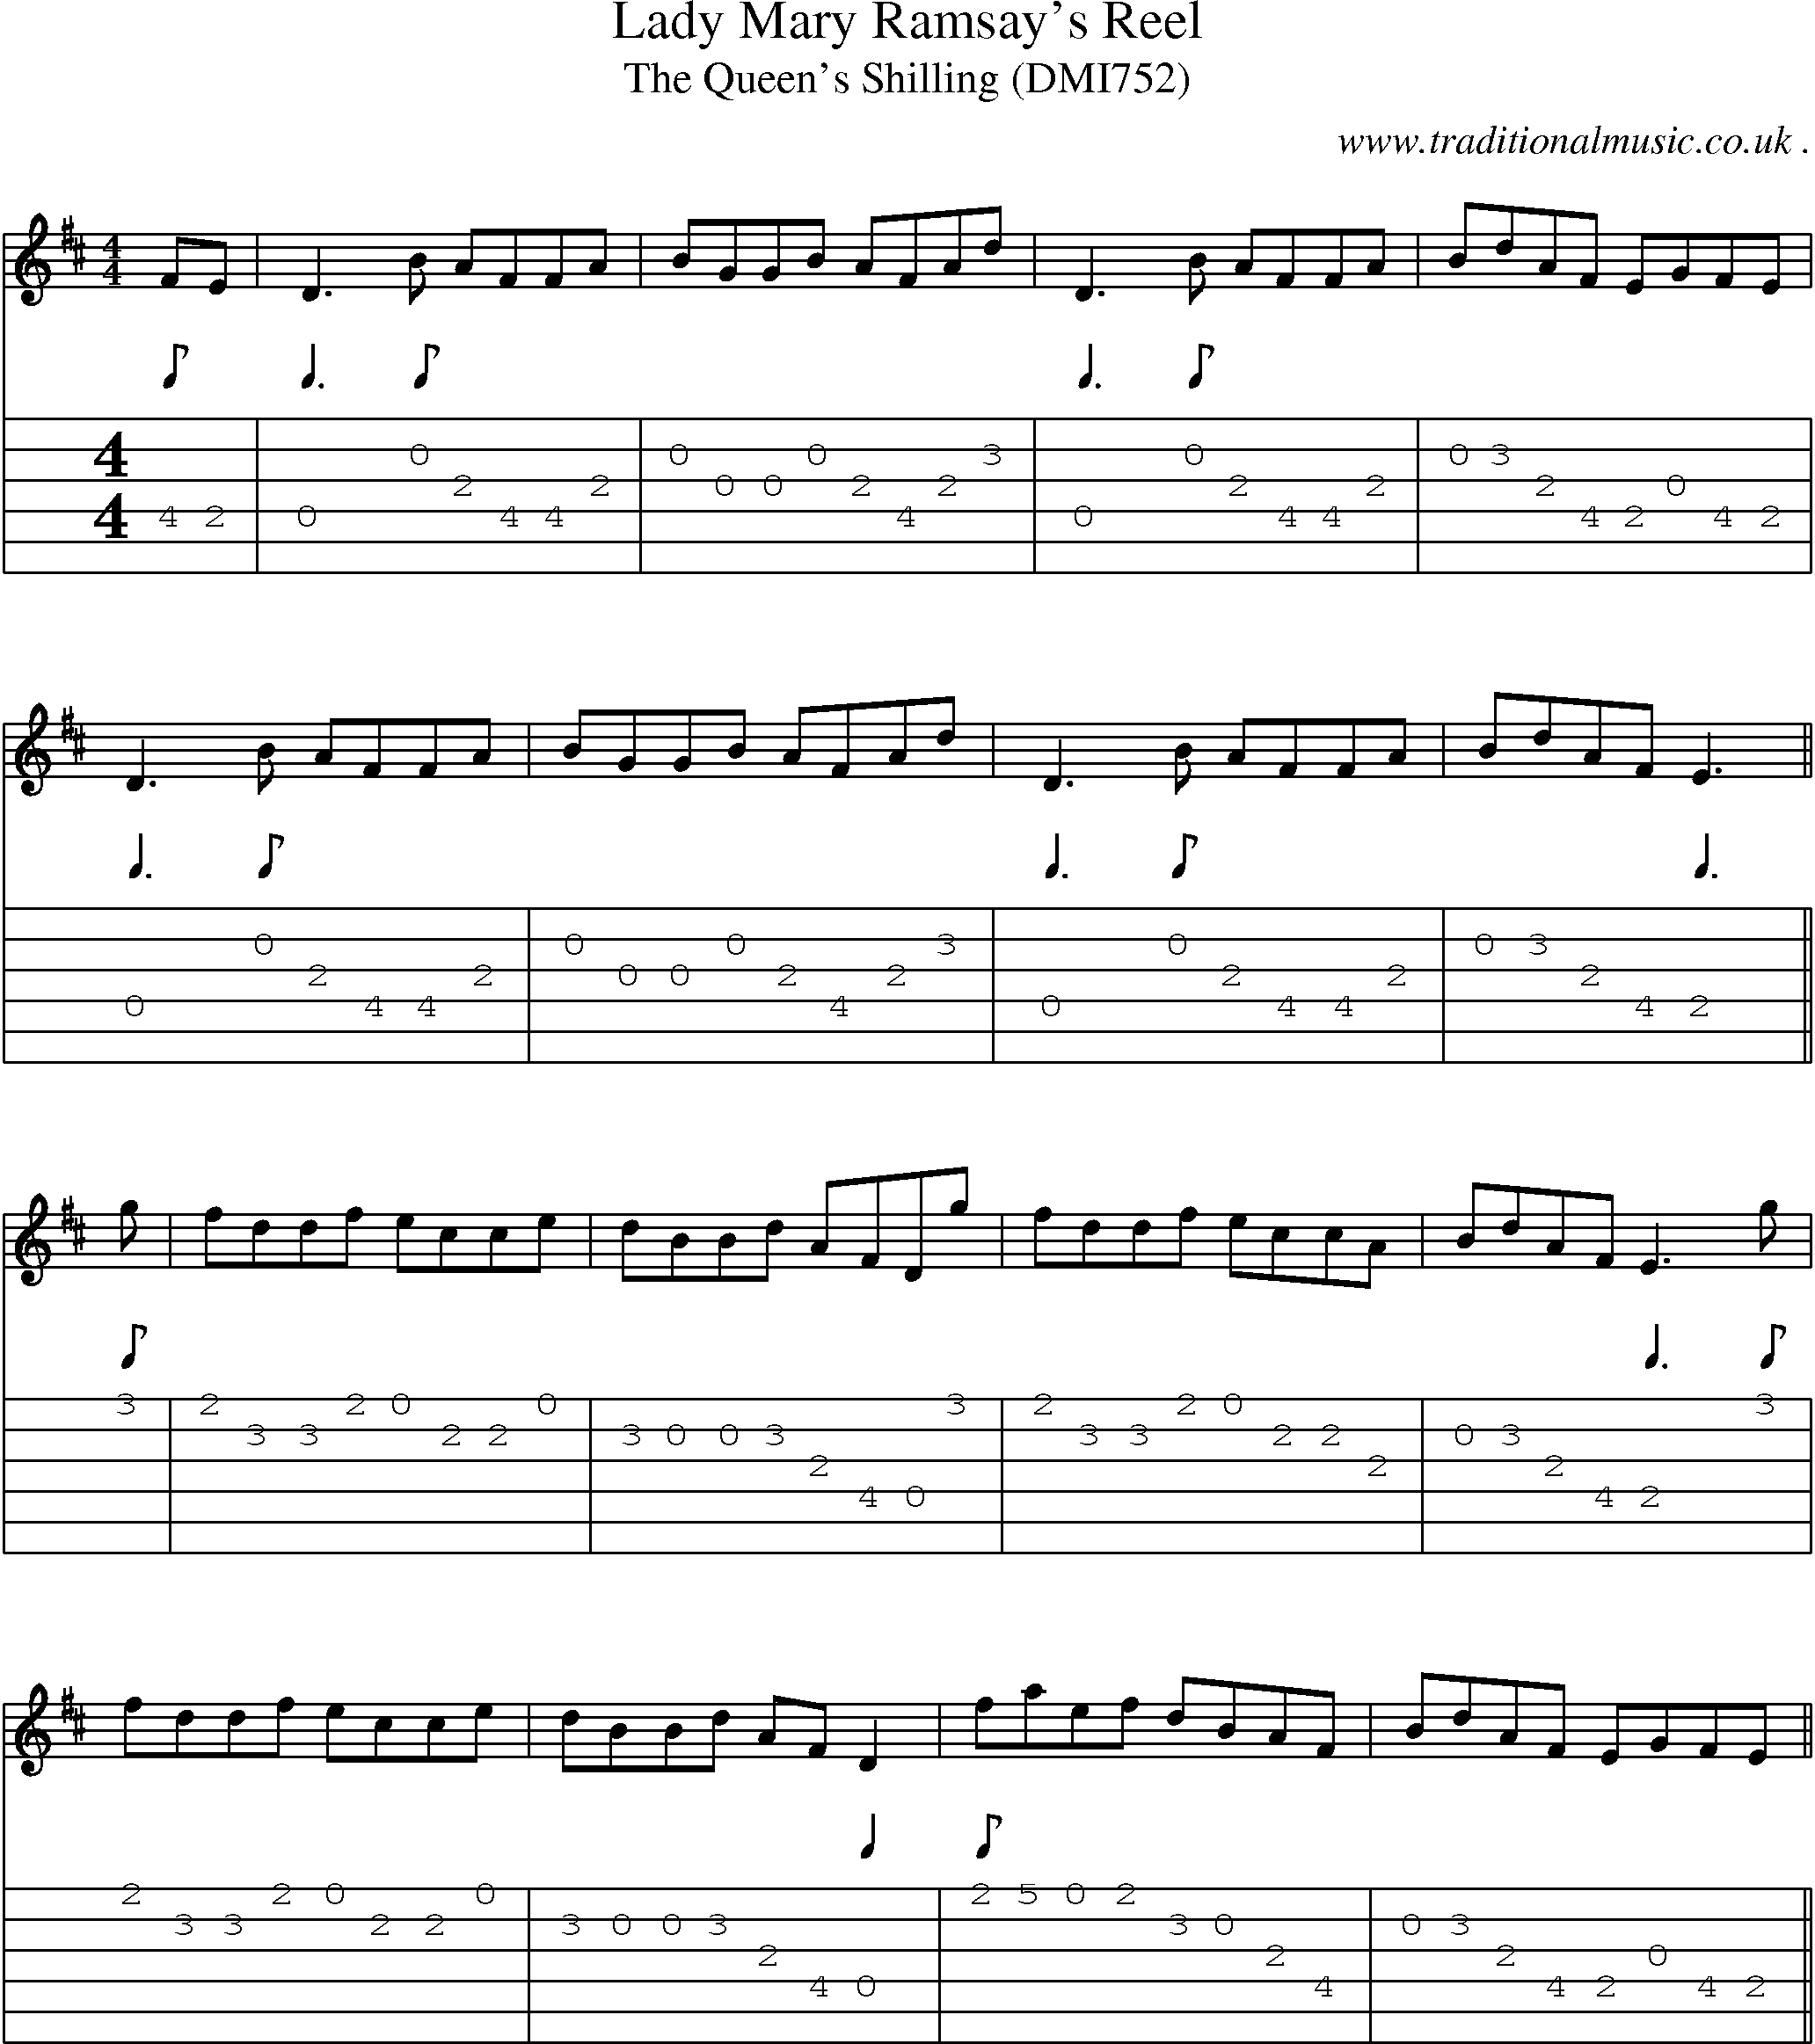 Sheet-music  score, Chords and Guitar Tabs for Lady Mary Ramsays Reel